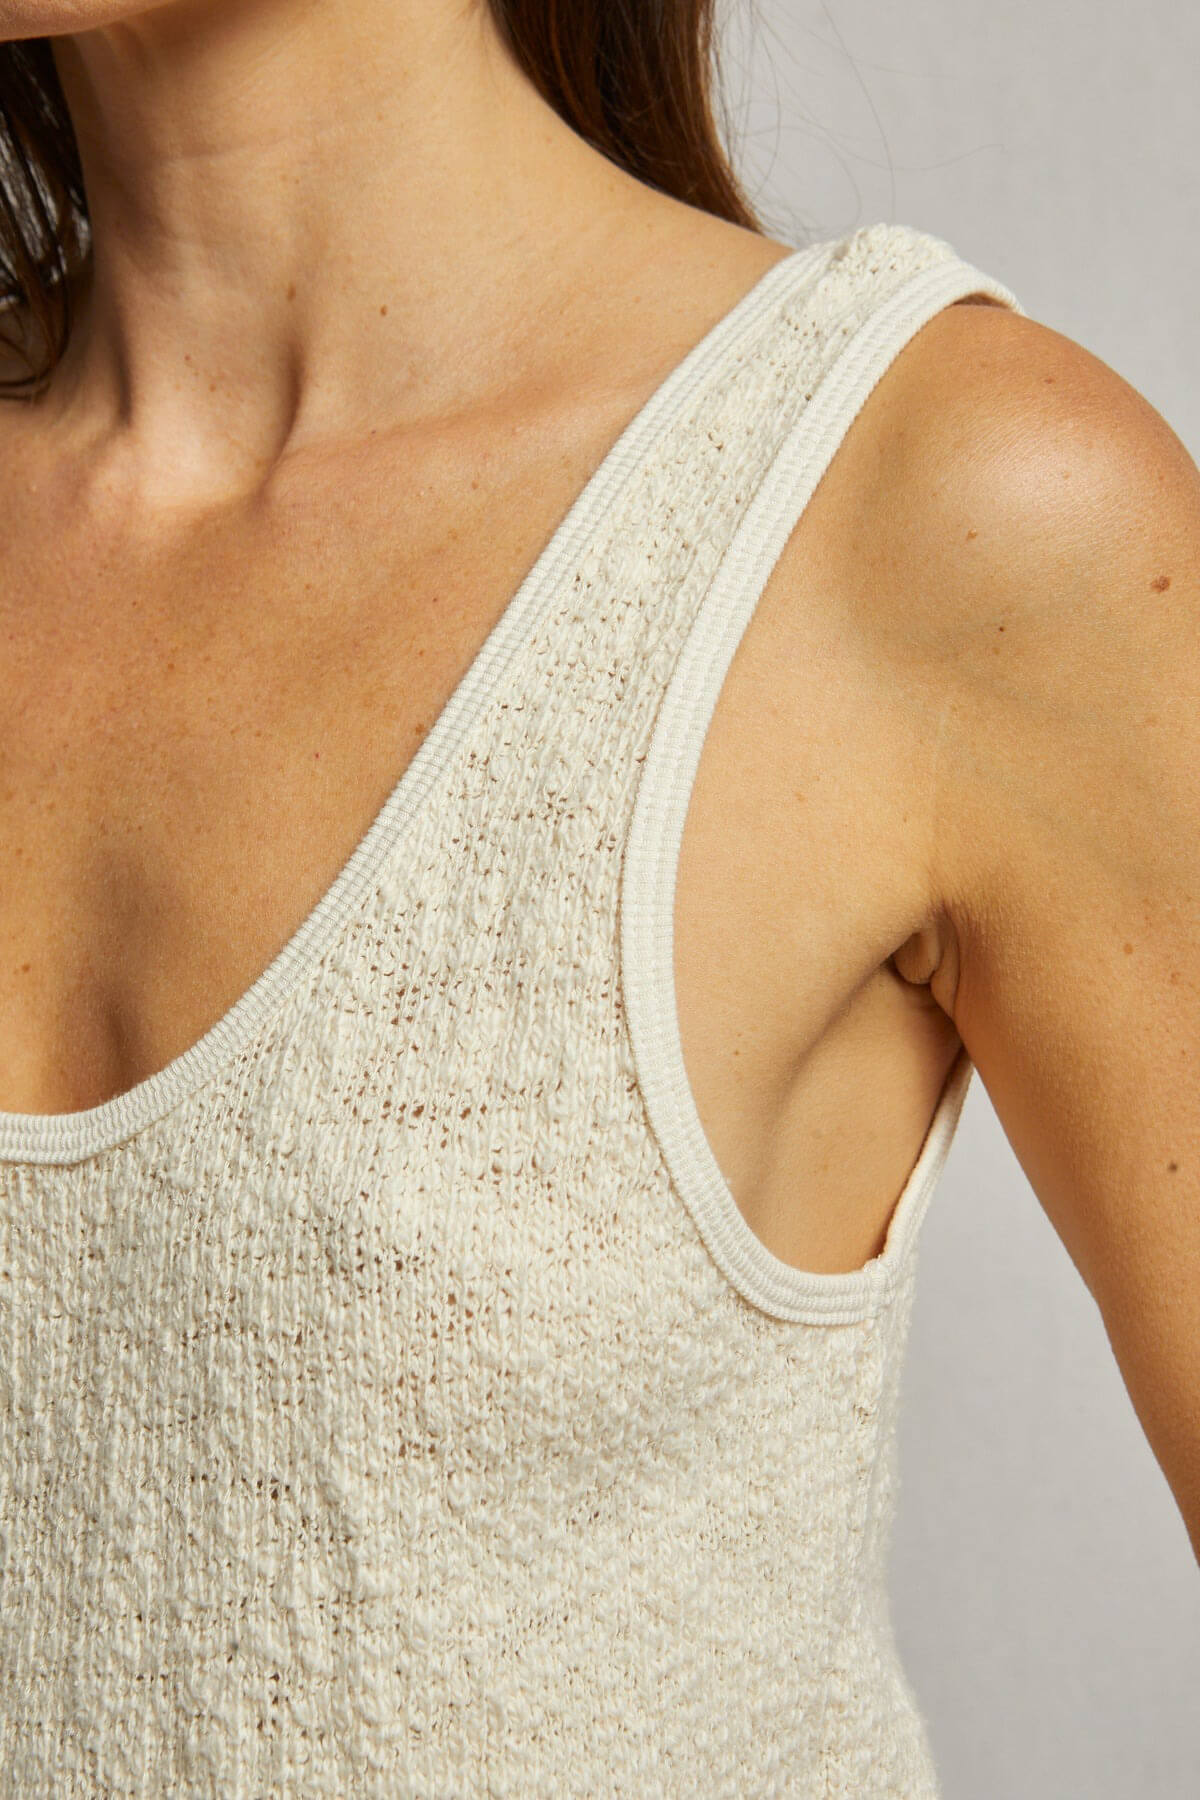 Perfect White Tee Stacey cotton mesh tank in natural